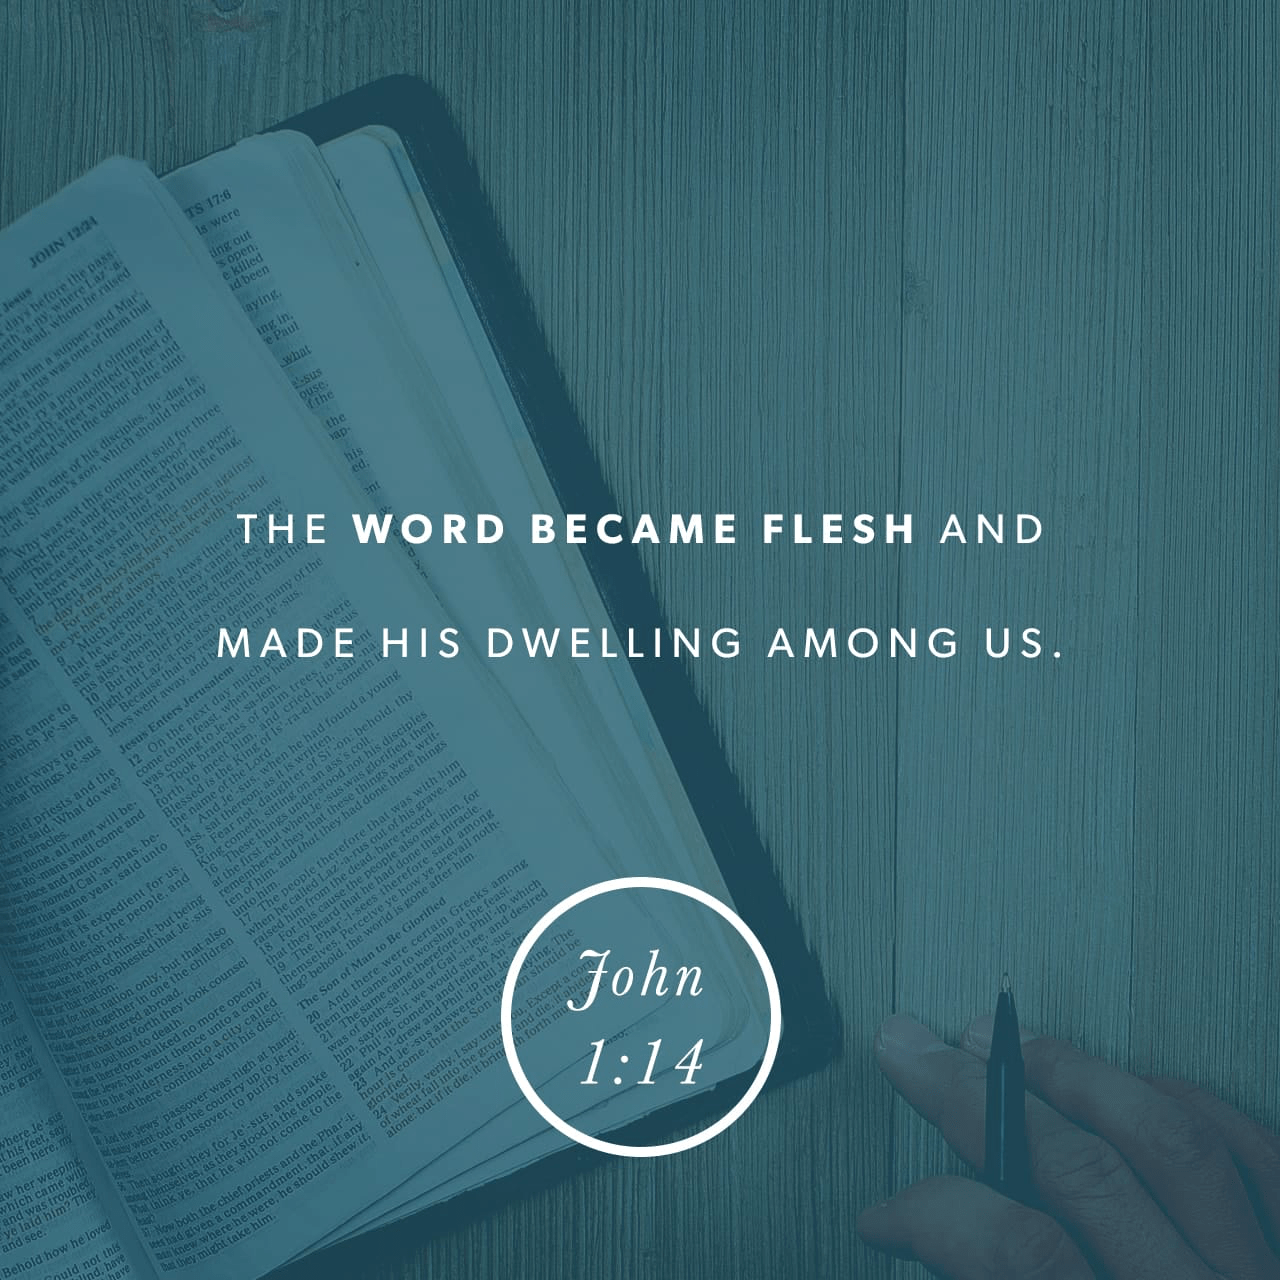 VOTD January 18 - “And the Word became flesh, and dwelt among us, and we saw His glory, glory as of the only begotten from the Father, full of grace and truth.” ‭‭John‬ ‭1:14‬ ‭NASB‬‬